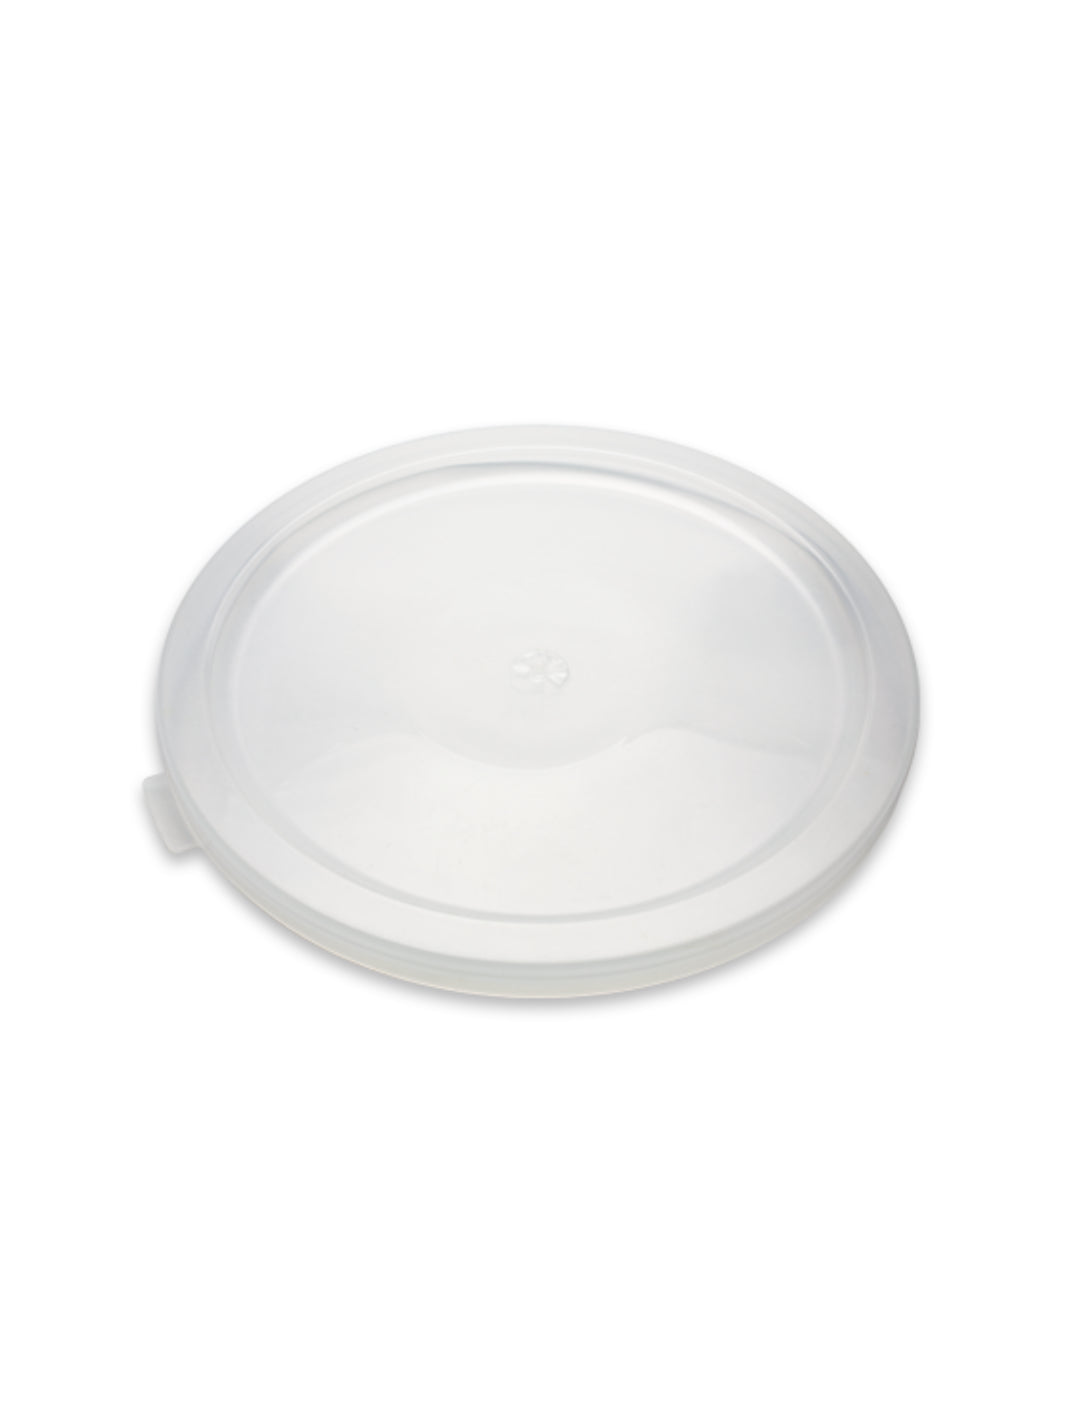 TODDY Commercial Model Replacement Lid